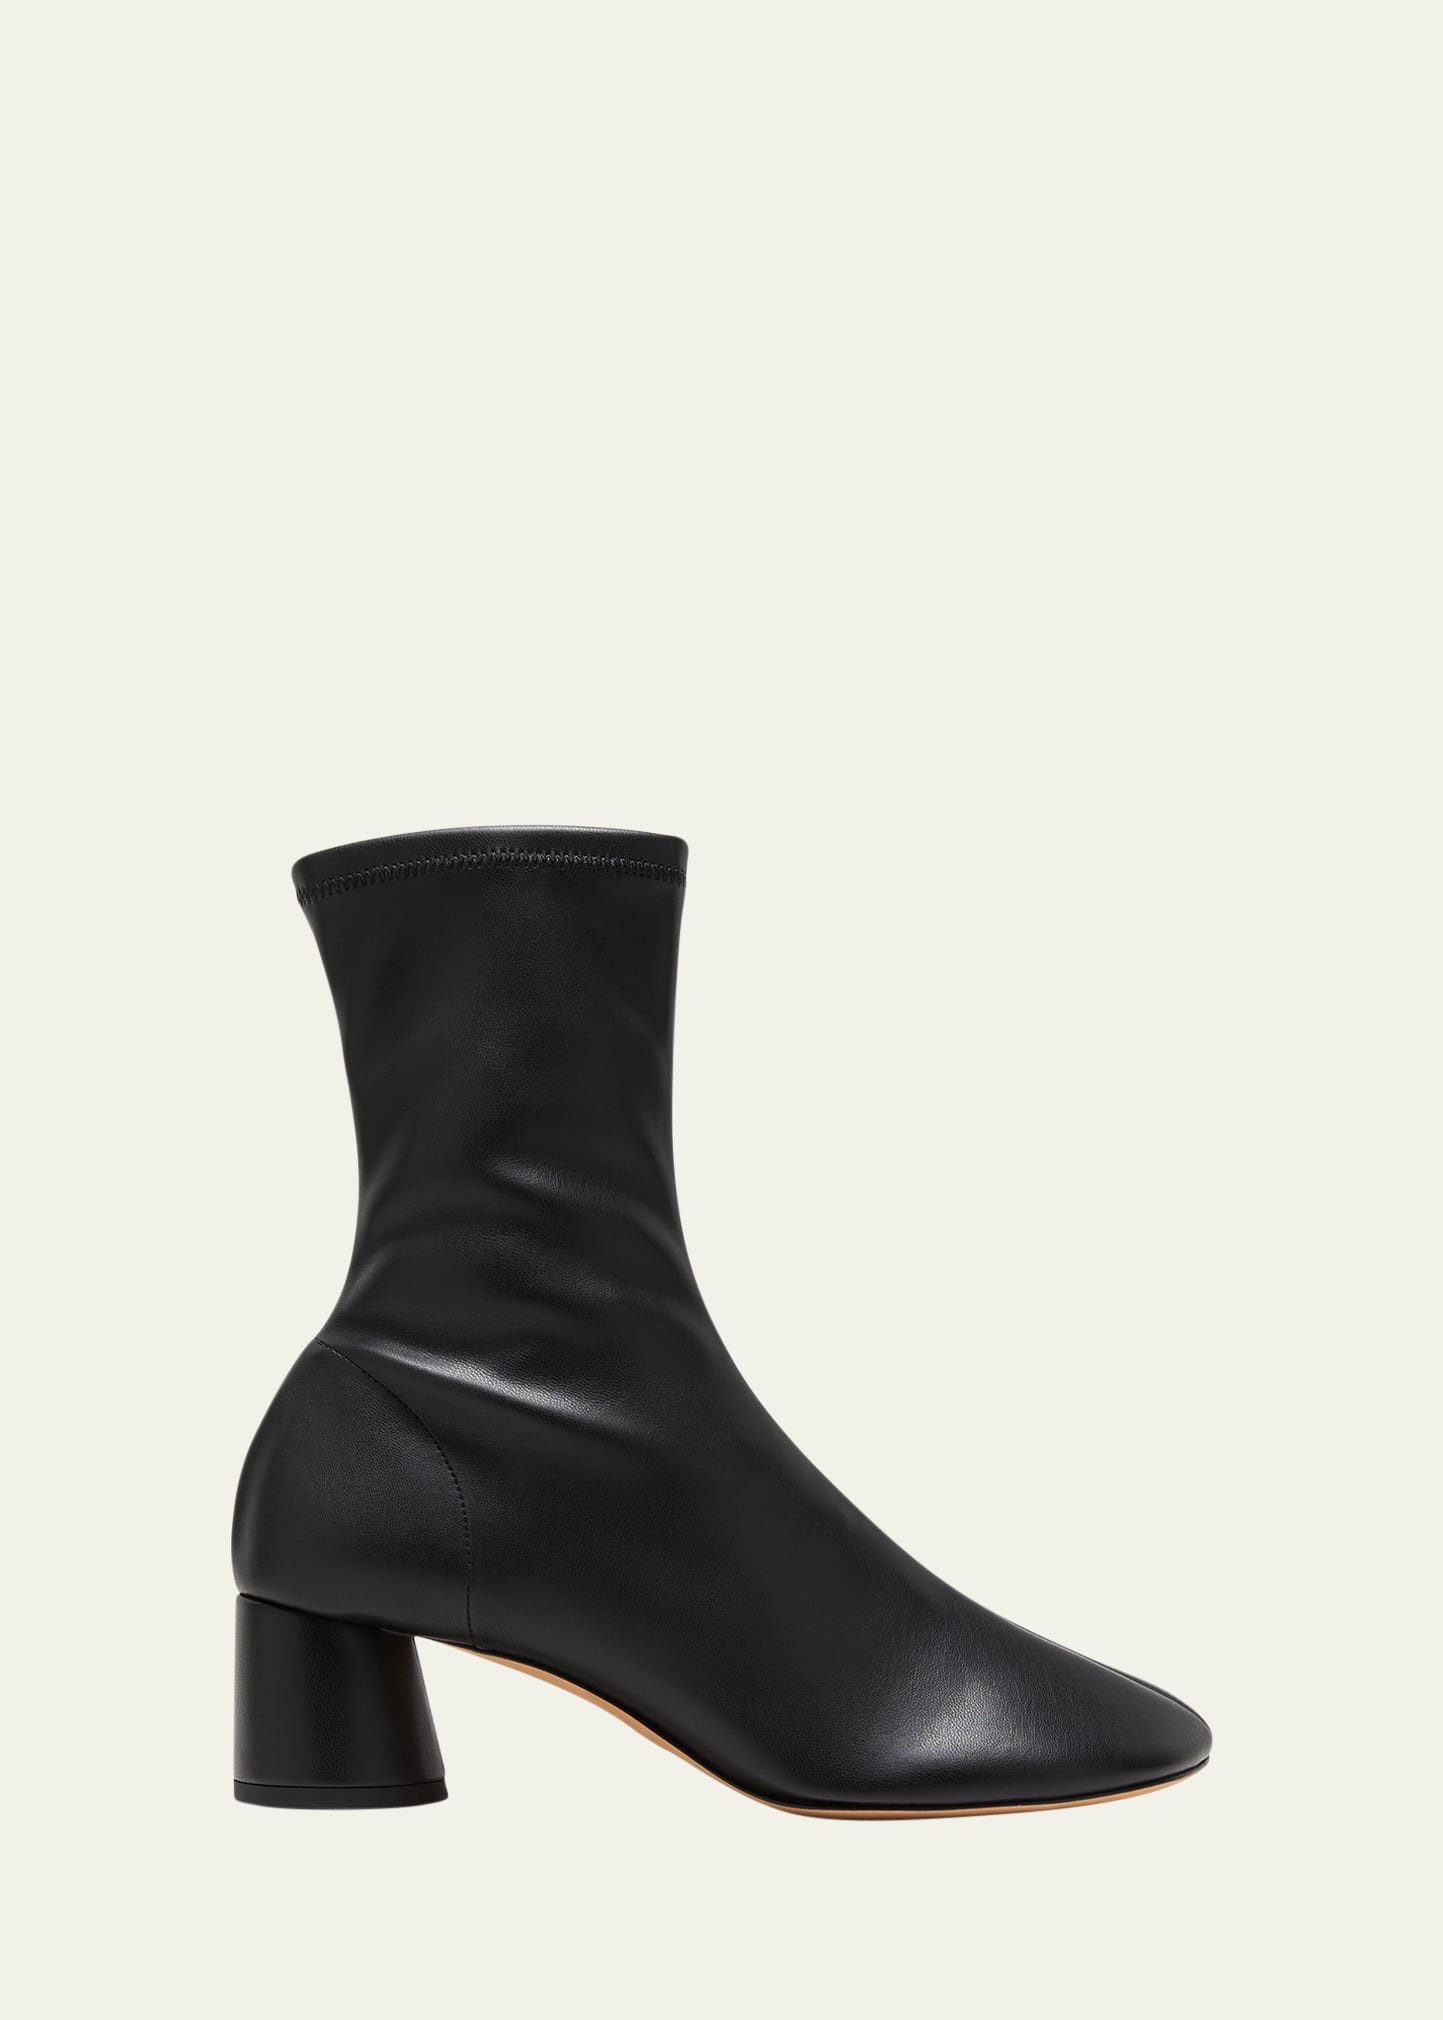 Proenza Schouler Glove Leather Ankle Boots In Black